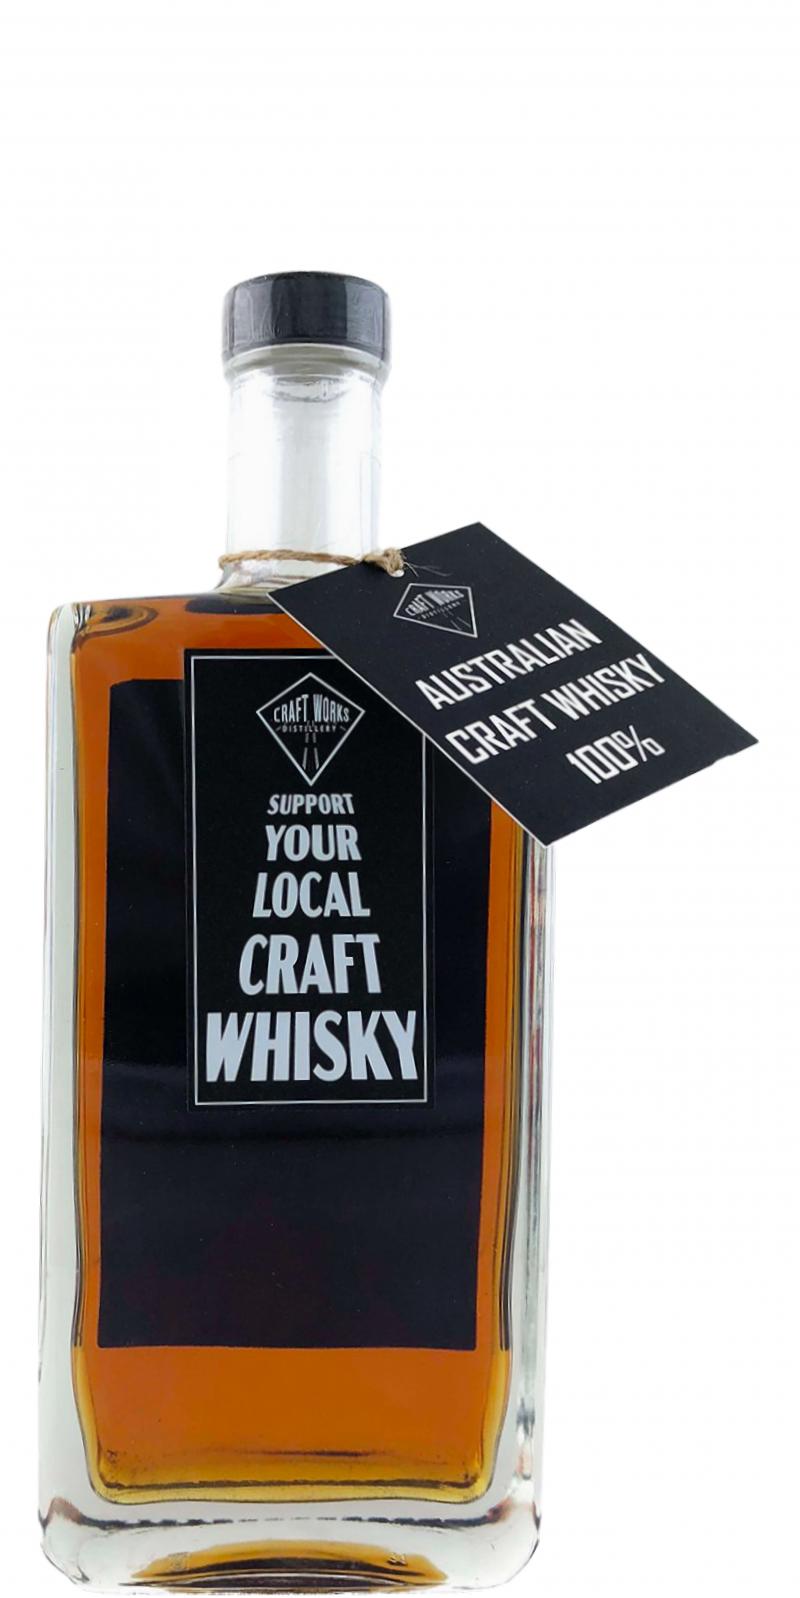 Craft Works Support your local craft whisky Crft